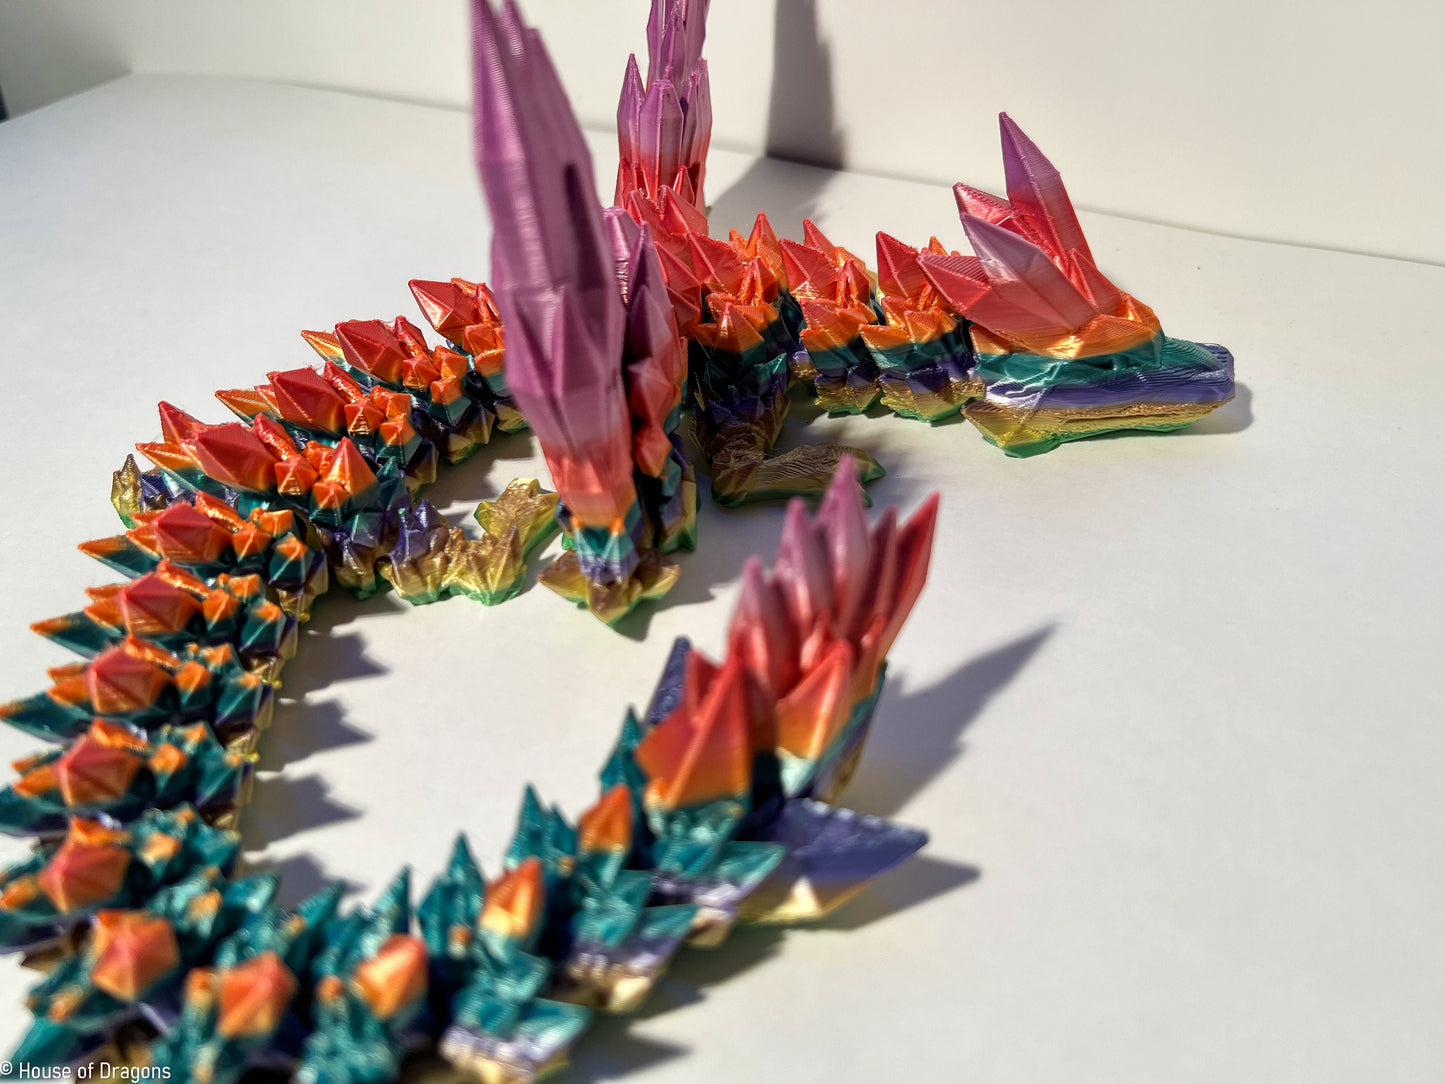 Magic Crystal Winged Dragon - Unique Articulated Sensory Toy - High Definition Limited Edition Colors - Fidget - Desk Toy